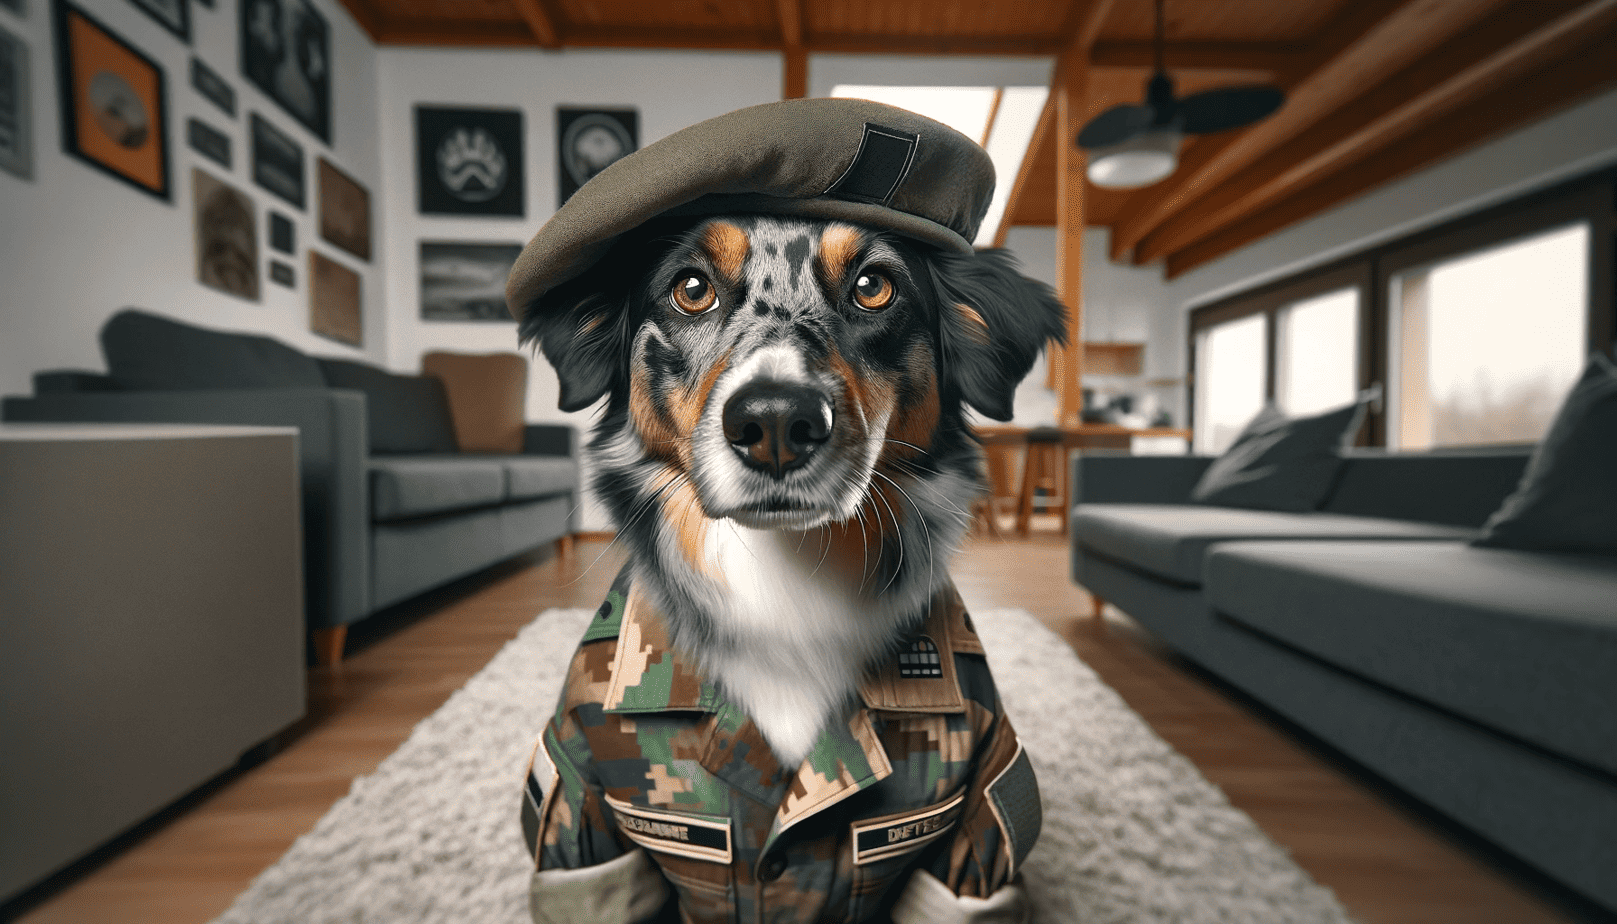 Female and Male Military Dog Names – Some Awesome Patriotic Dog Names